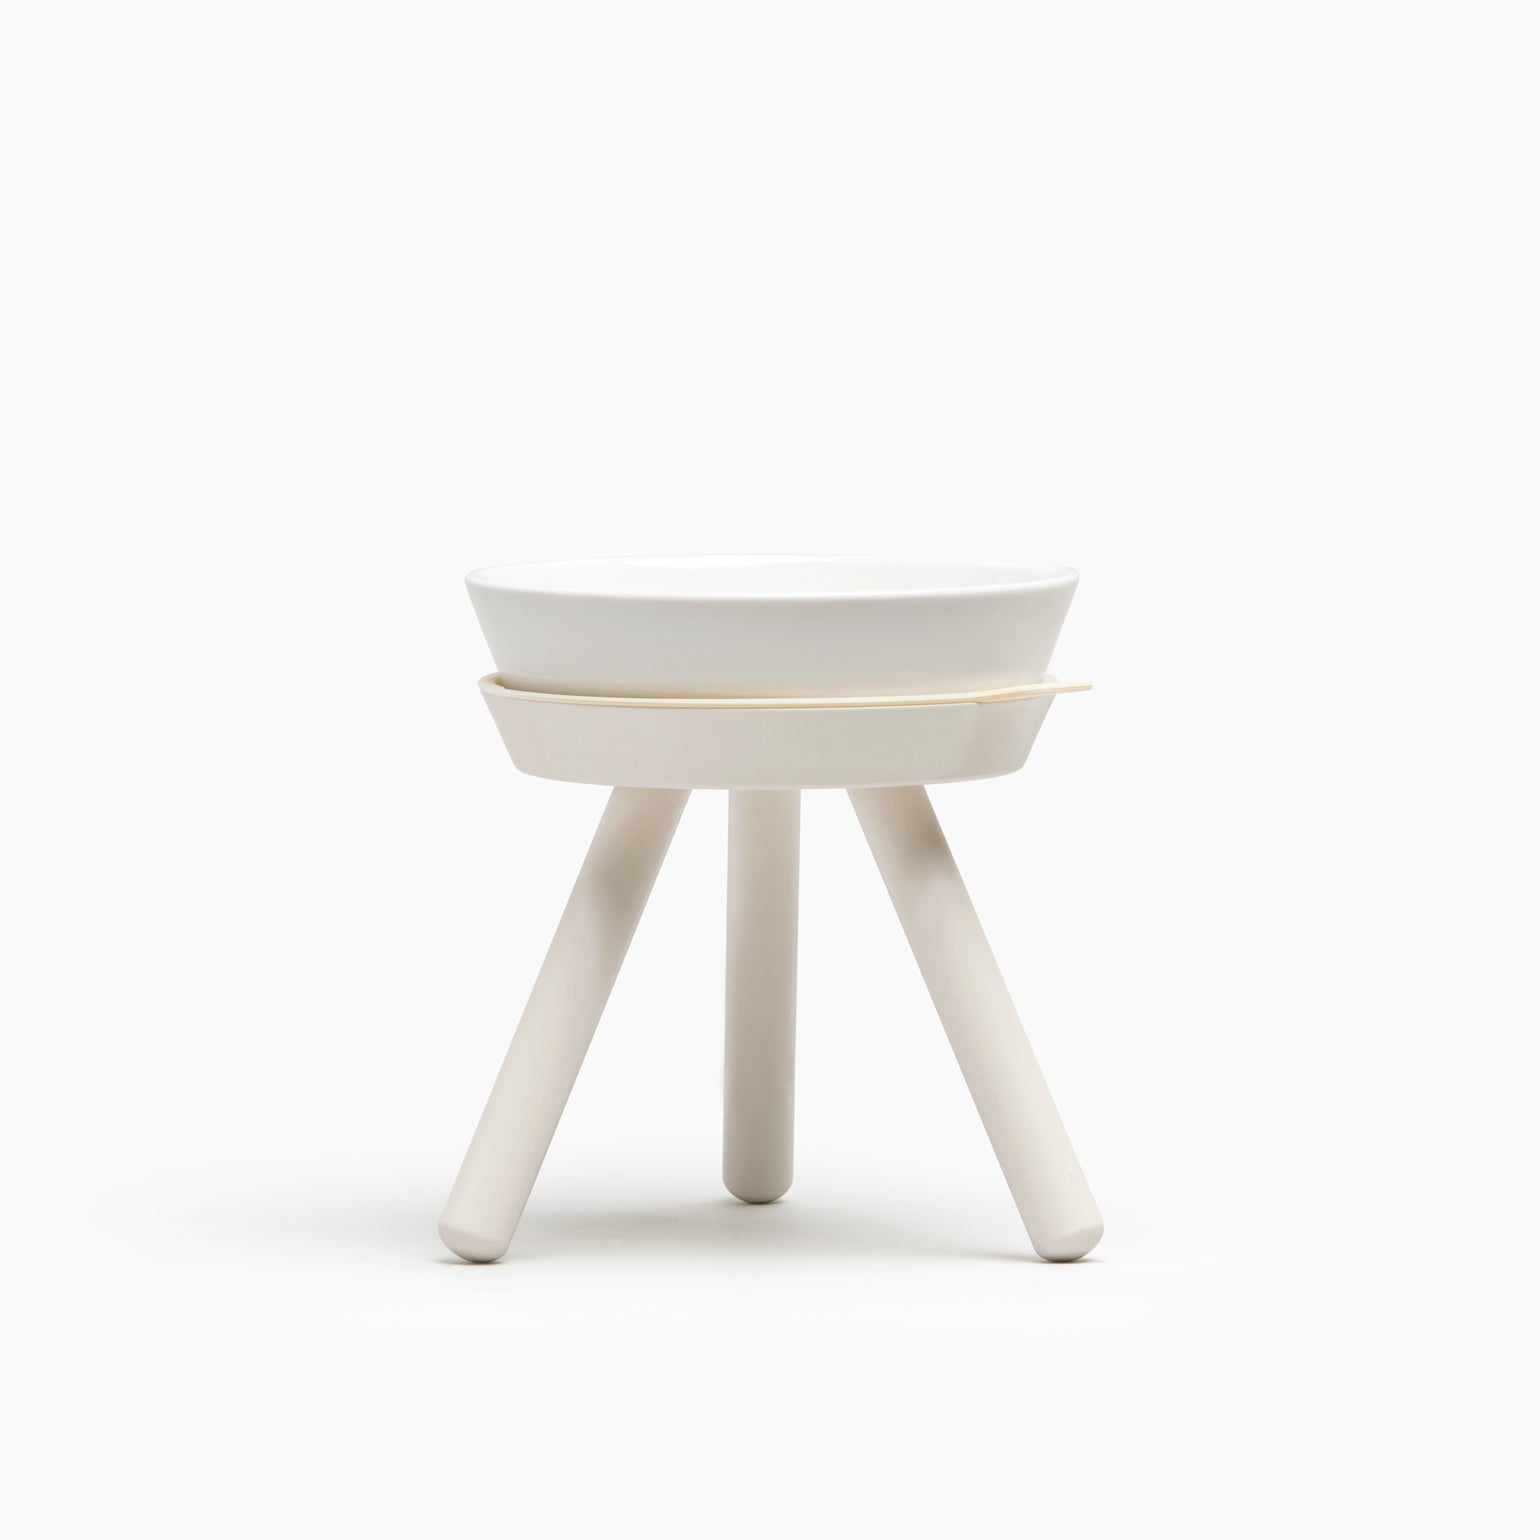 INHERENT - Oreo Table White, Tall Small